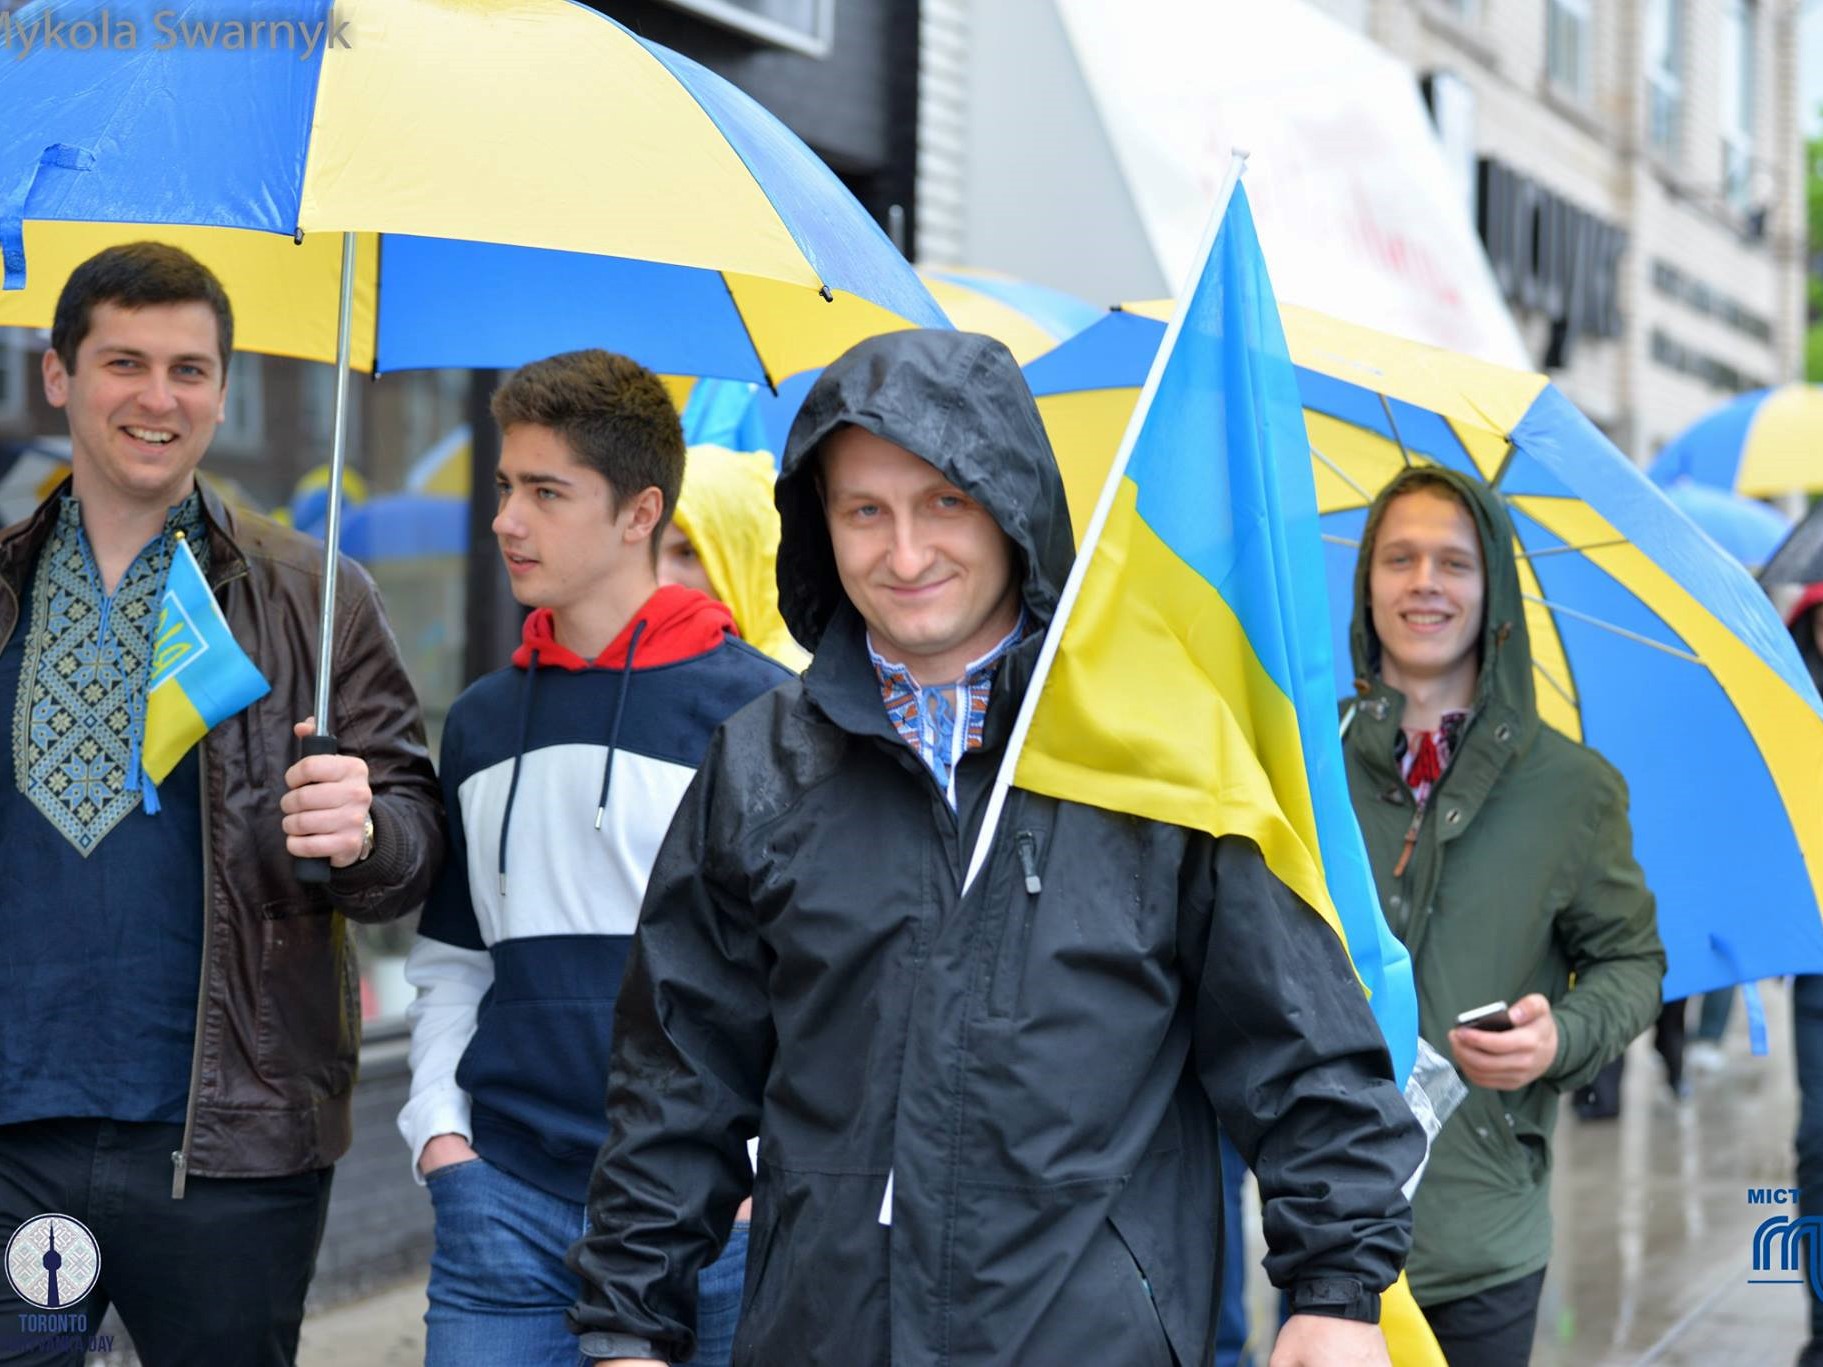 Parade down the Bloor West Village with Ukrainian flags, IKEA (blue-and-yellow) umbrellas and music